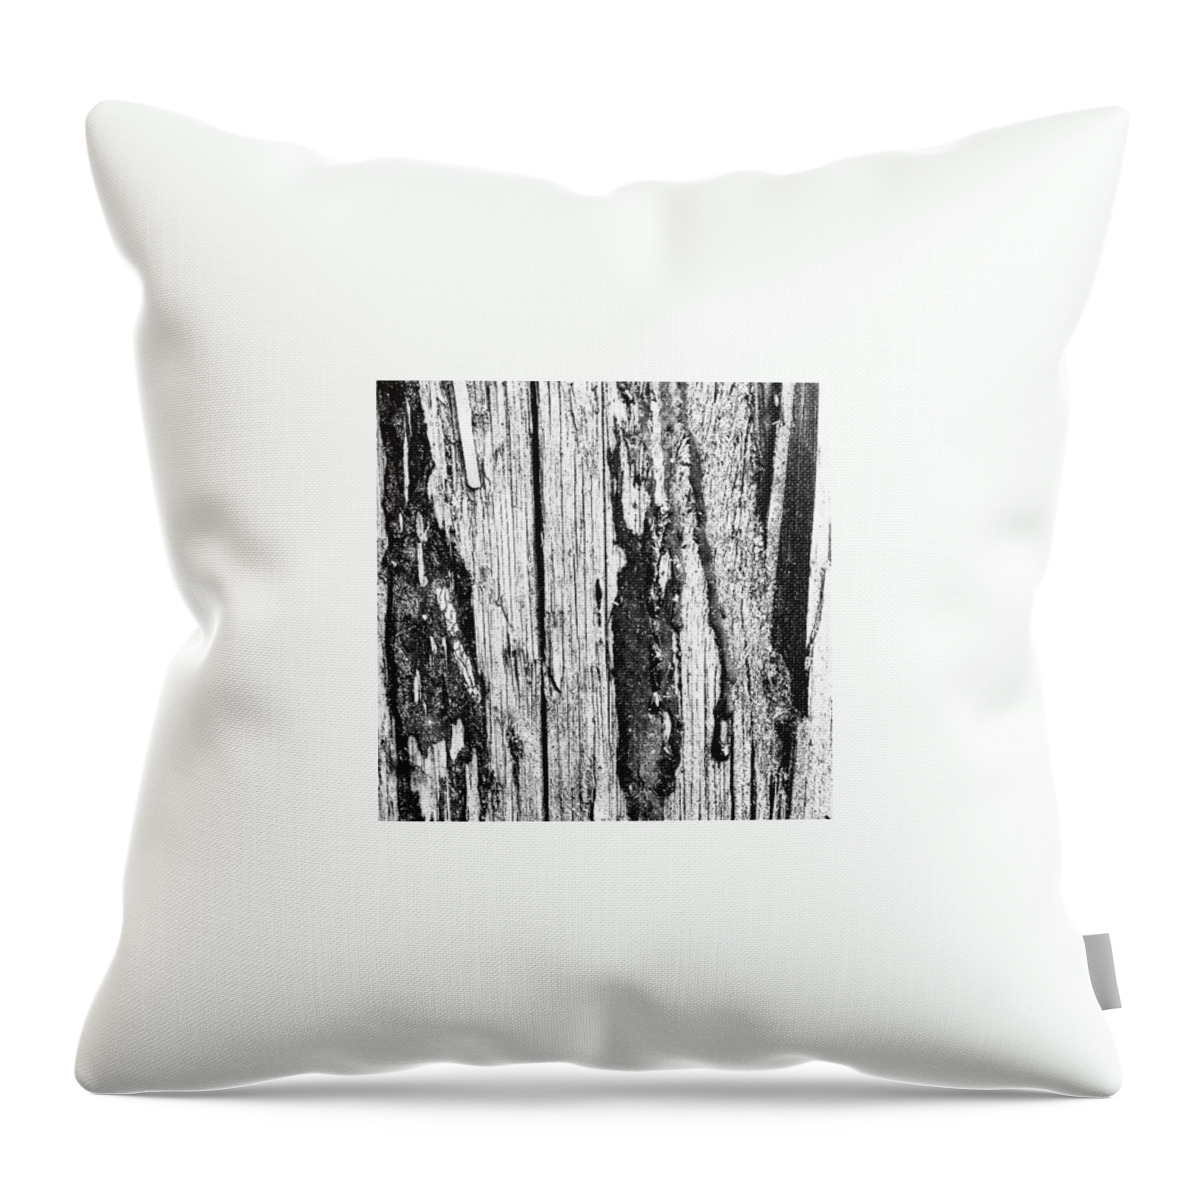 Beautiful Throw Pillow featuring the photograph Wooden Post B 'n' W 2 by Jason Roust